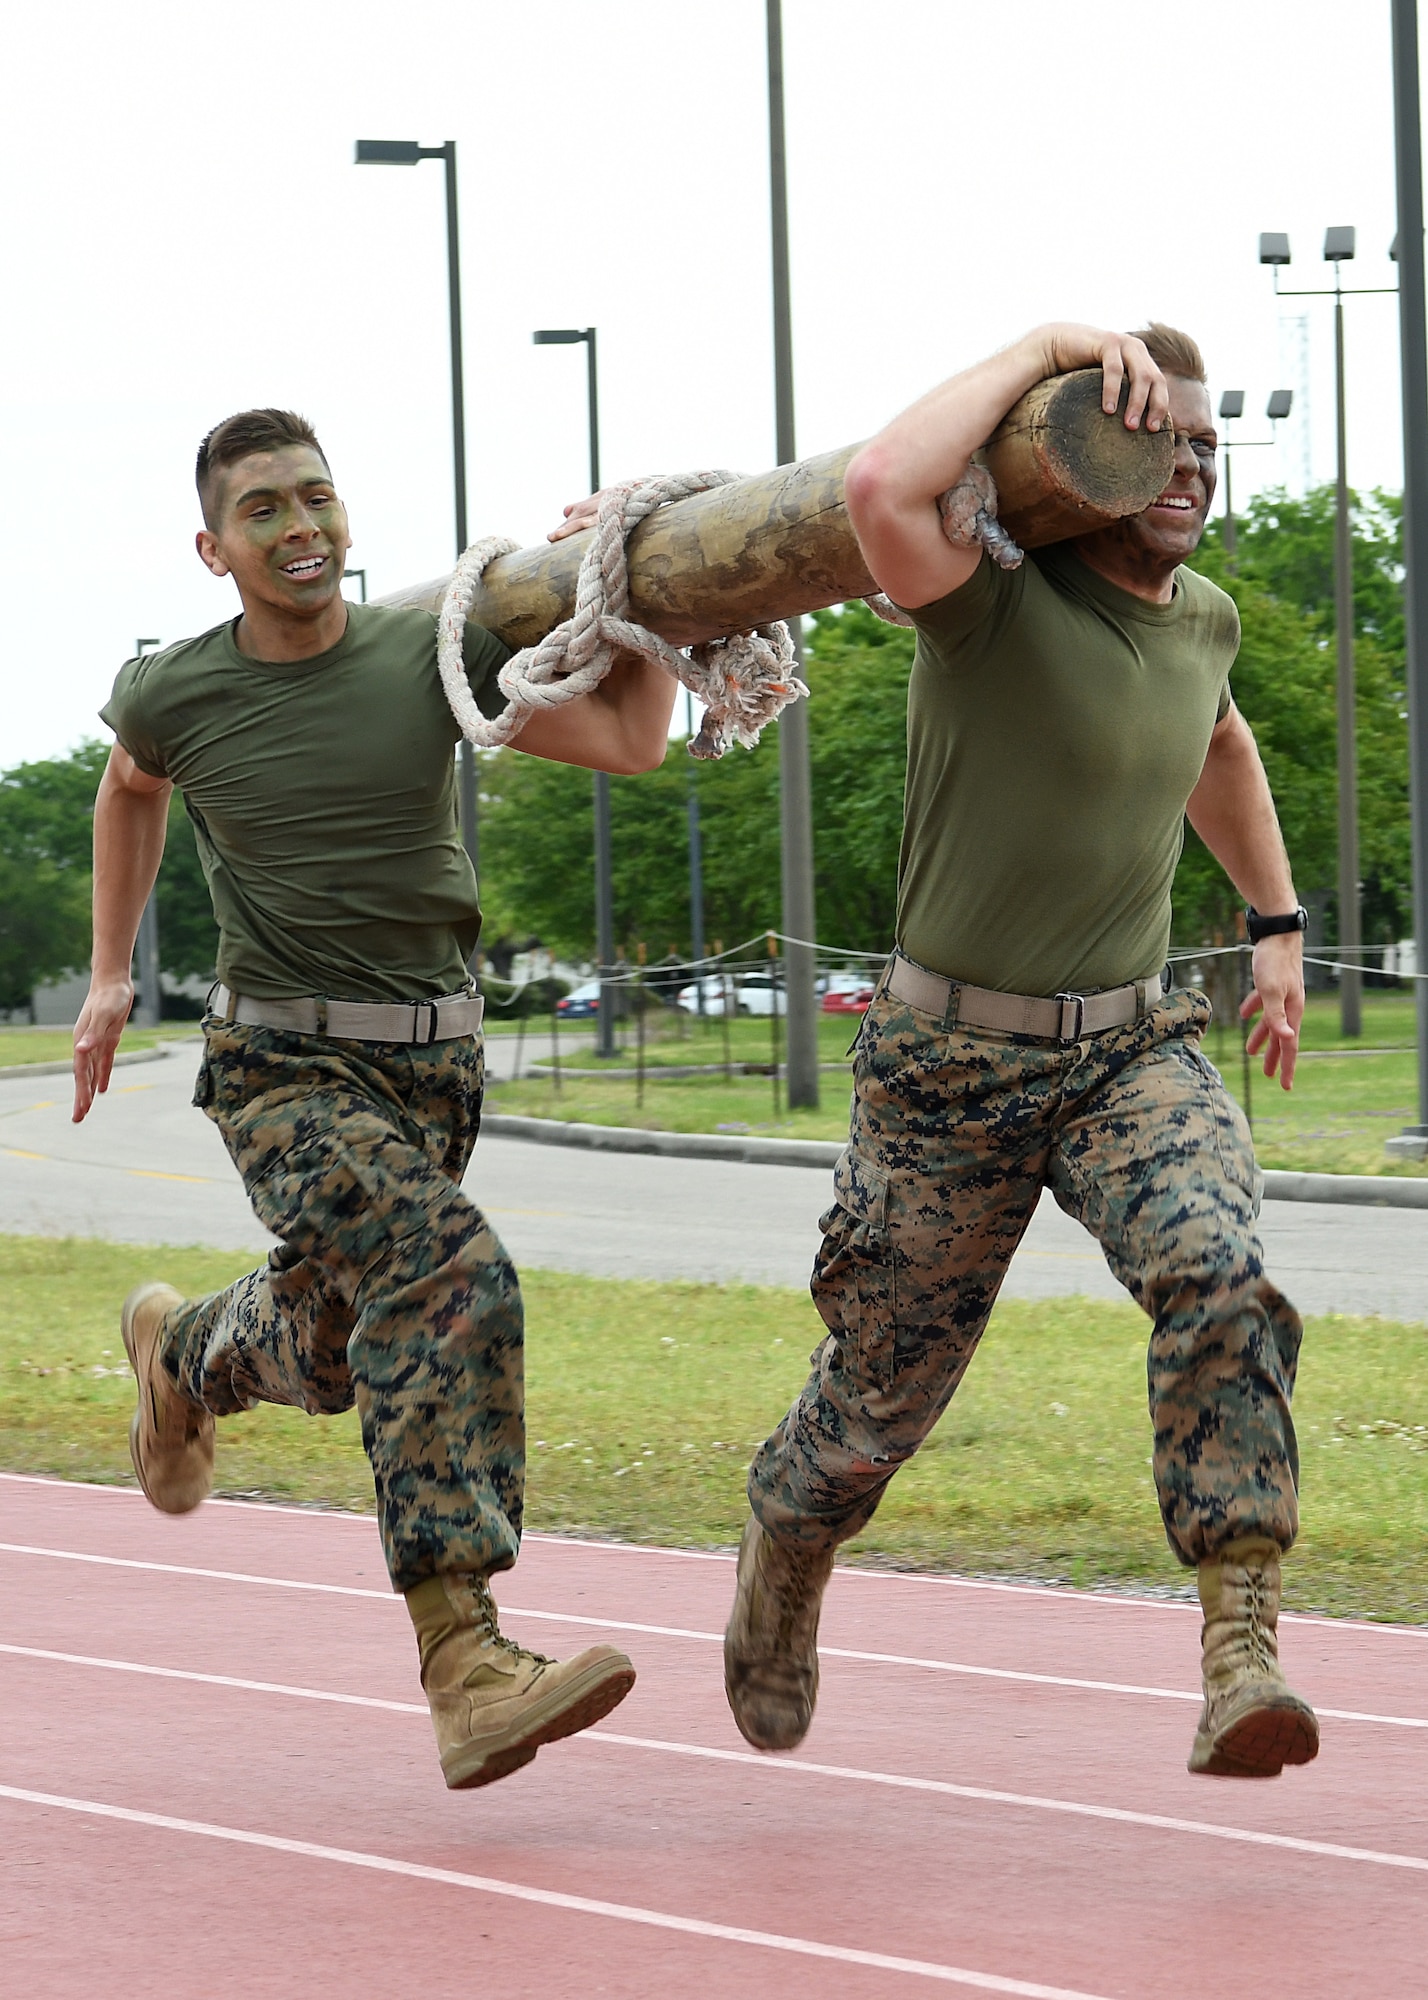 U.S. Marine Corps Private First Class Anthony Maccarelli, Keesler Marine Detachment meteorological oceanographic analyst forecaster student, and Lance Corporal Andrew Parker, Keesler Marine Detachment MOAF student, participate in the log race during the 2nd Annual Warrior Day at the Triangle Track at Keesler Air Force Base, Mississippi, April 6, 2018. The event served to promote unit cohesion, camaraderie and small unit leadership. The winning team received a Warrior Medallion as well as a coin. (U.S. Air Force photo by Airman 1st Class Suzie Plotnikov)